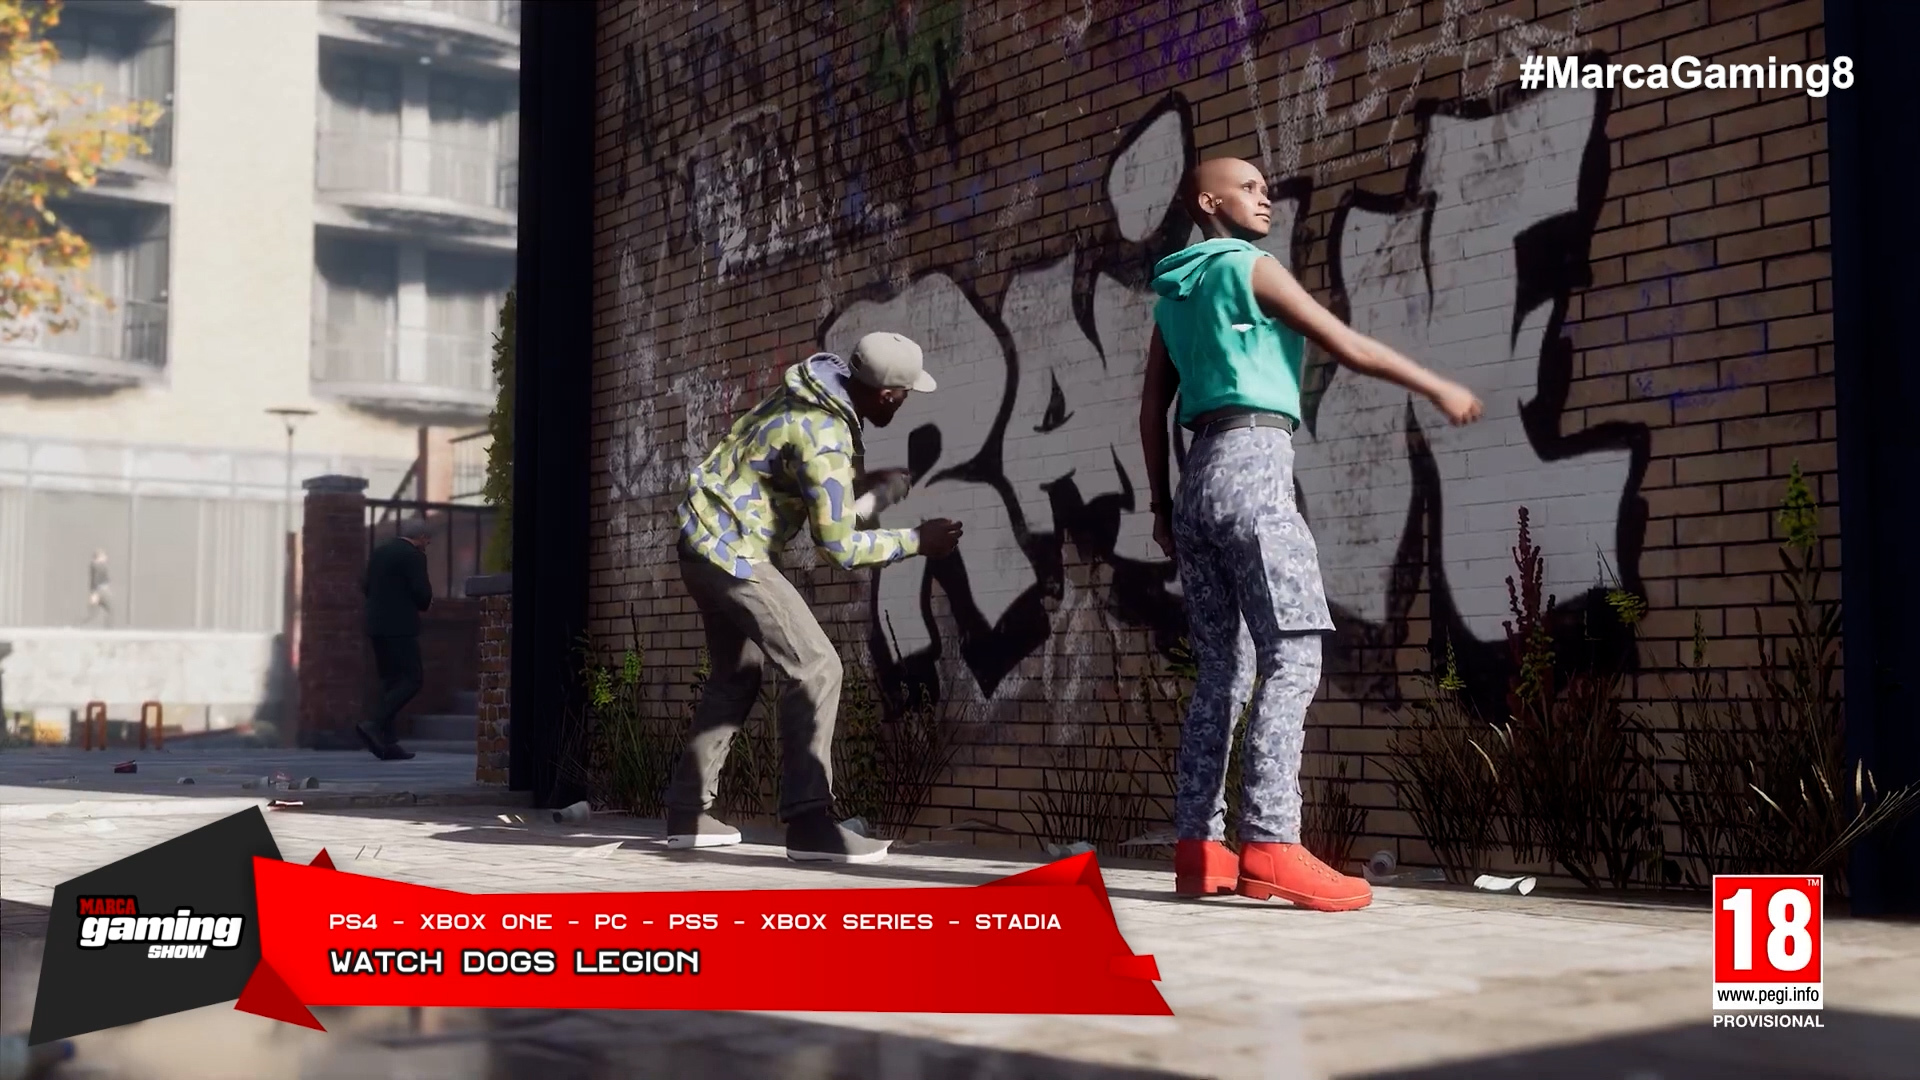 Watch Dogs Legion (PS4 - XBOX ONE - PC - PS5 - XBOX SERIES - STADIA)